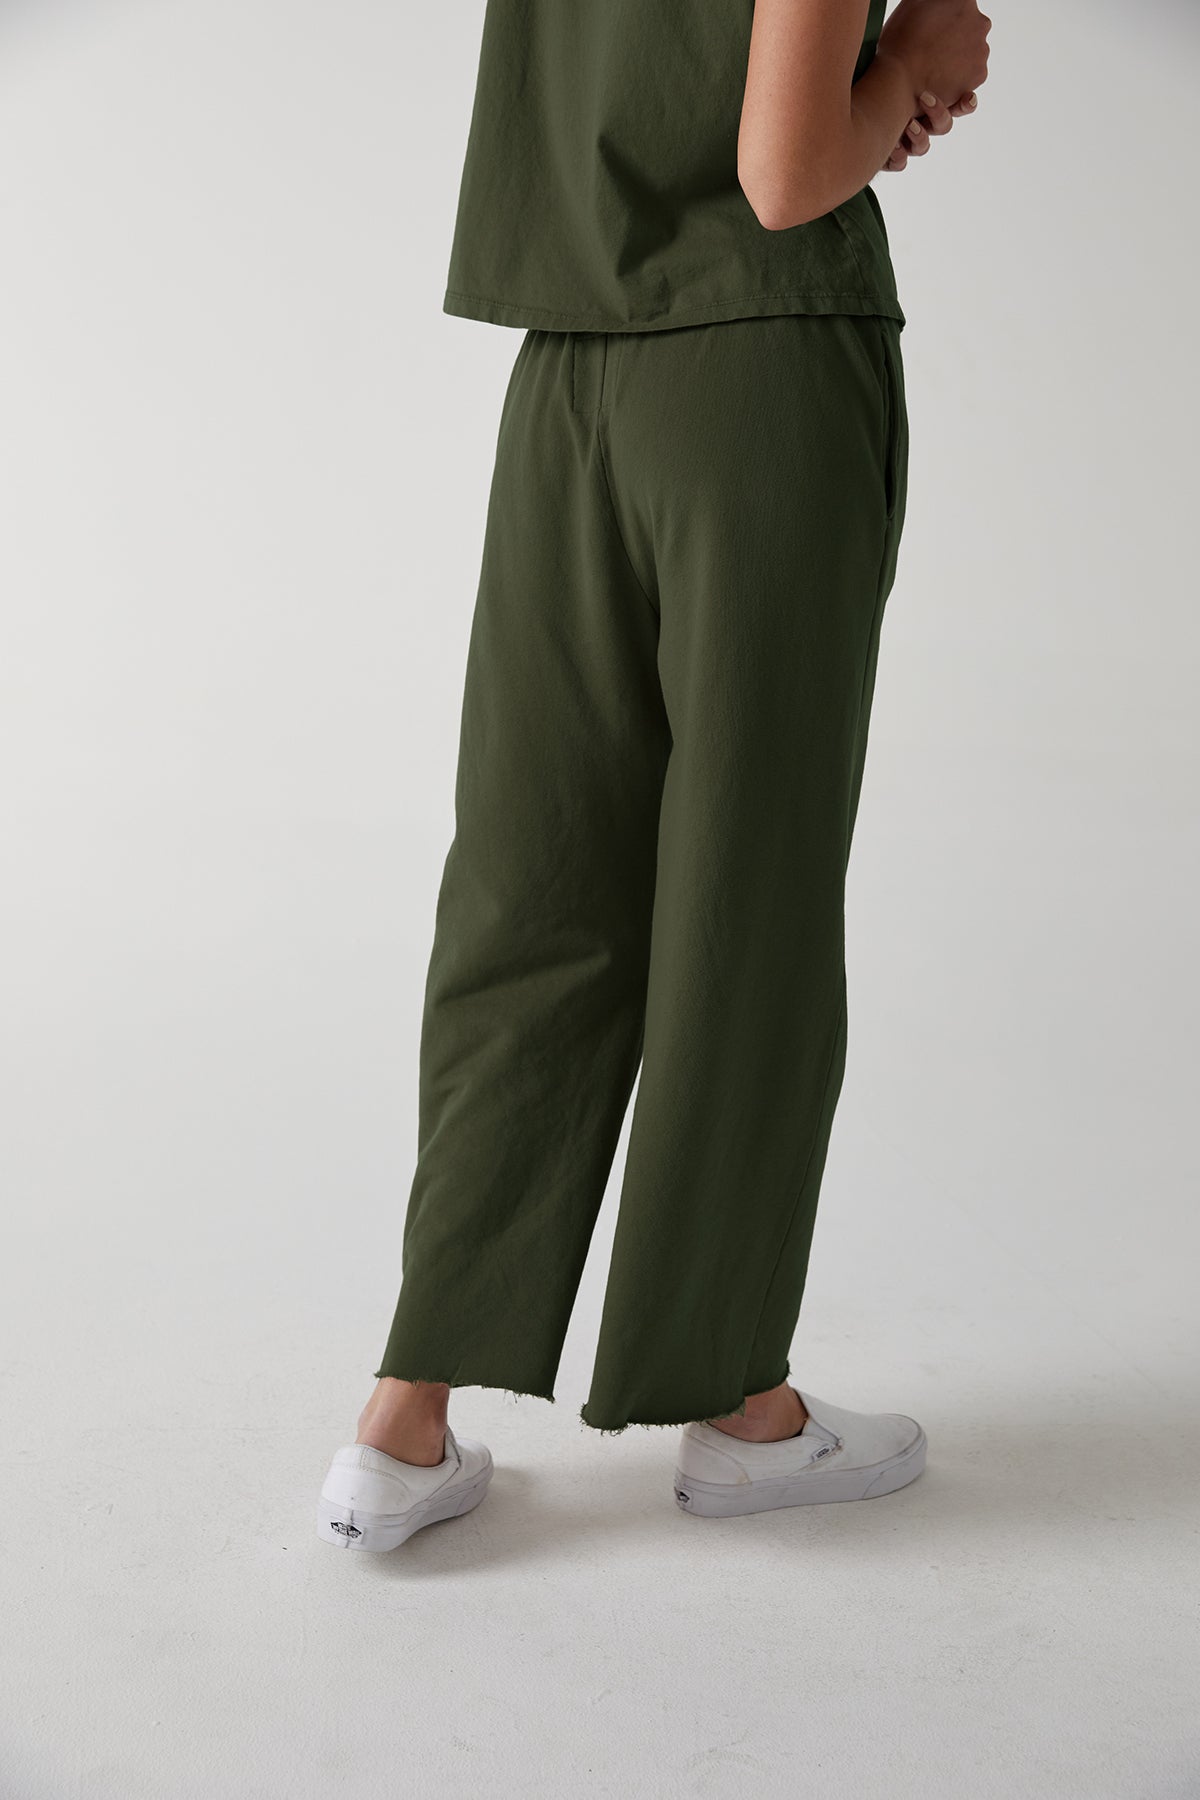   Montecito Sweatpant in dillweed green back 